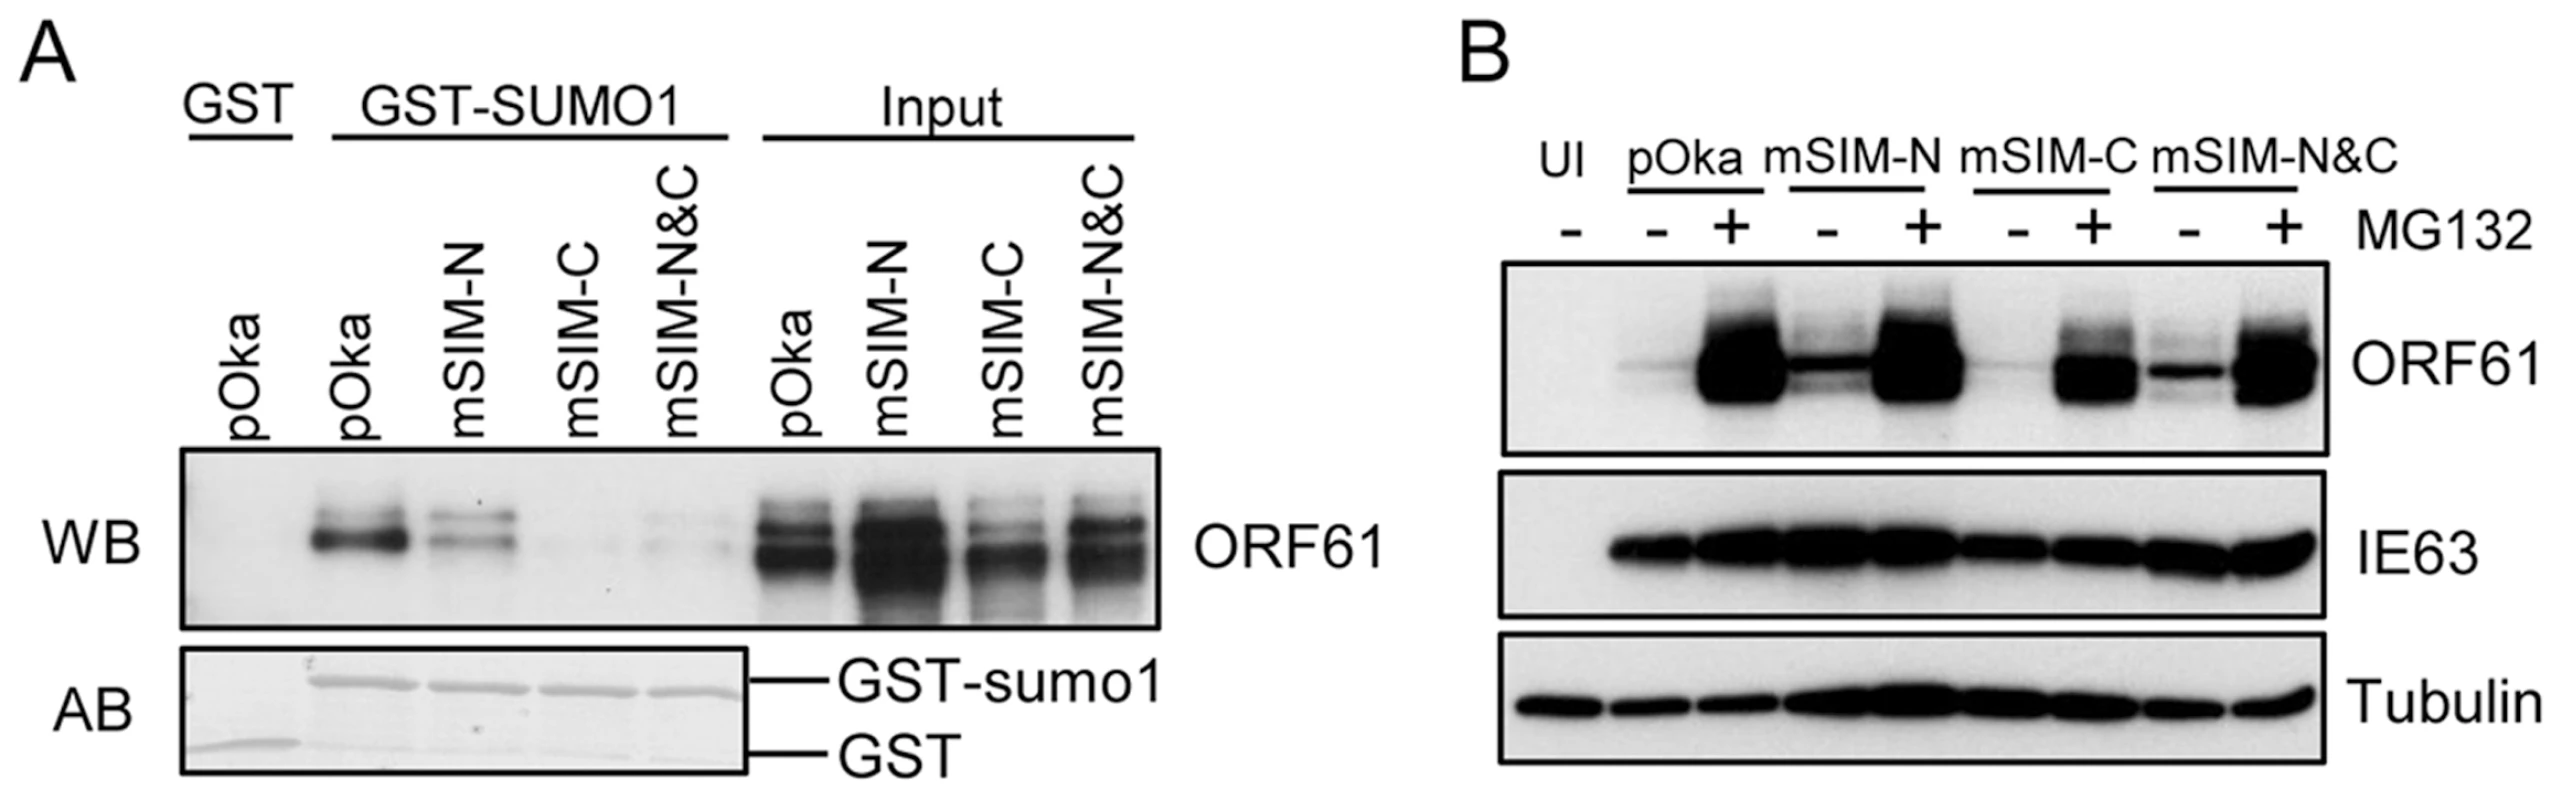 ORF61 SIMs are essential for the SUMO-binding capacity of ORF61 expressed in VZV-infected cells.